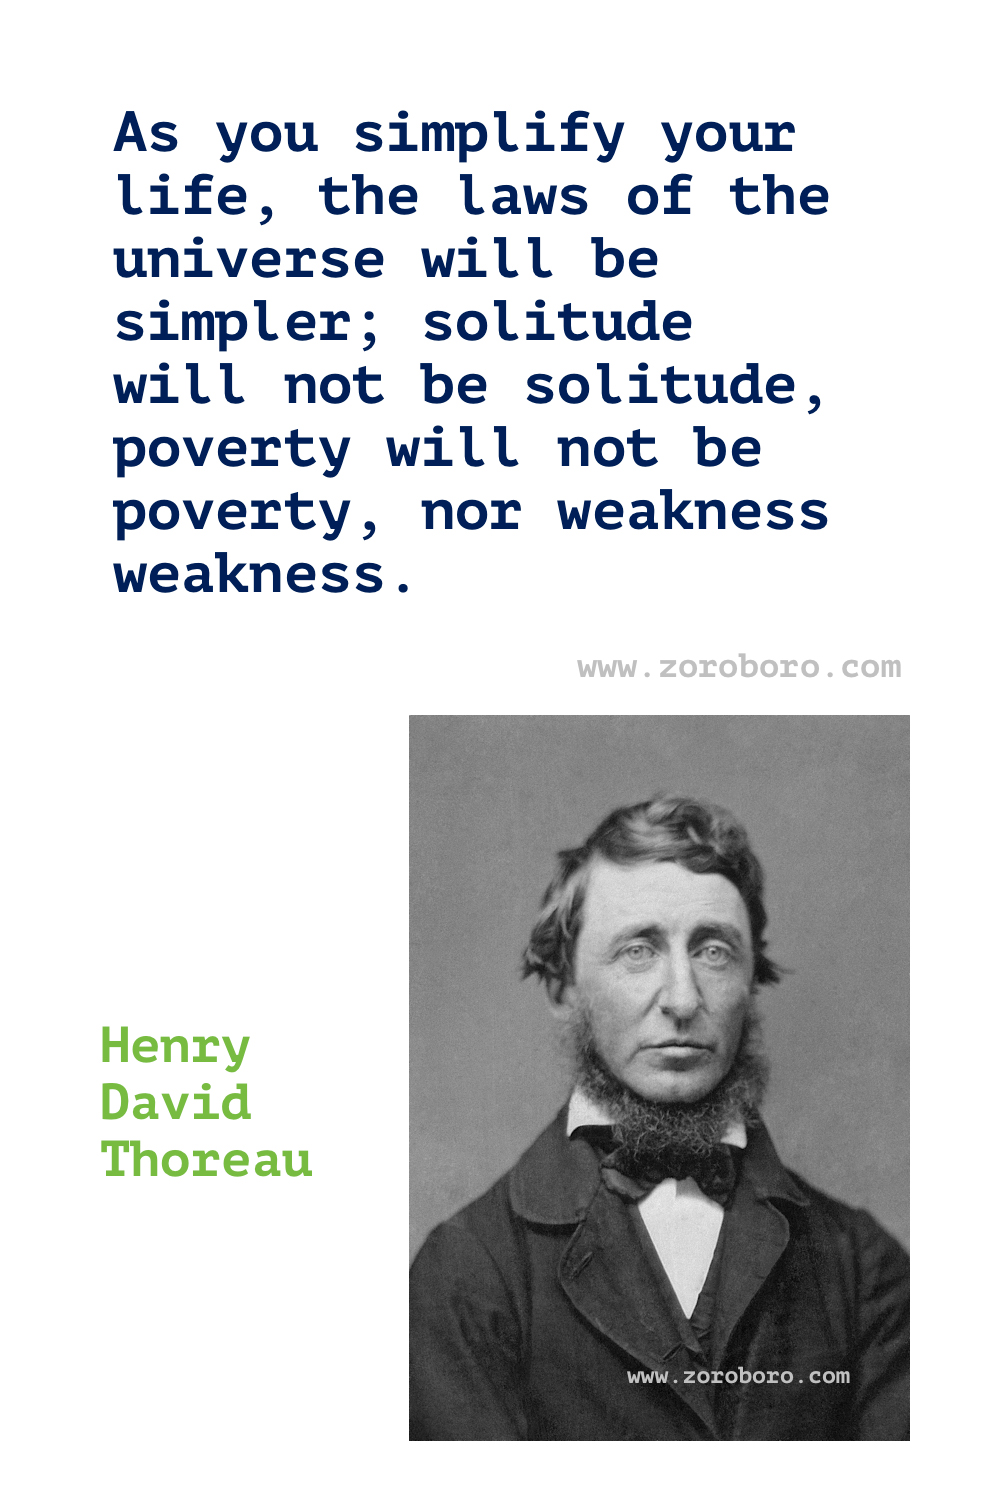 Henry David Thoreau Quotes. Henry David Thoreau Walden Quotes. Henry David Thoreau Nature Quotes.Henry David Thoreau Poems. Henry David Thoreau Quotes. Civil Disobedience/On the Duty of Civil Disobedience Quotes. Henry David Thoreau Inspirational Quotes.